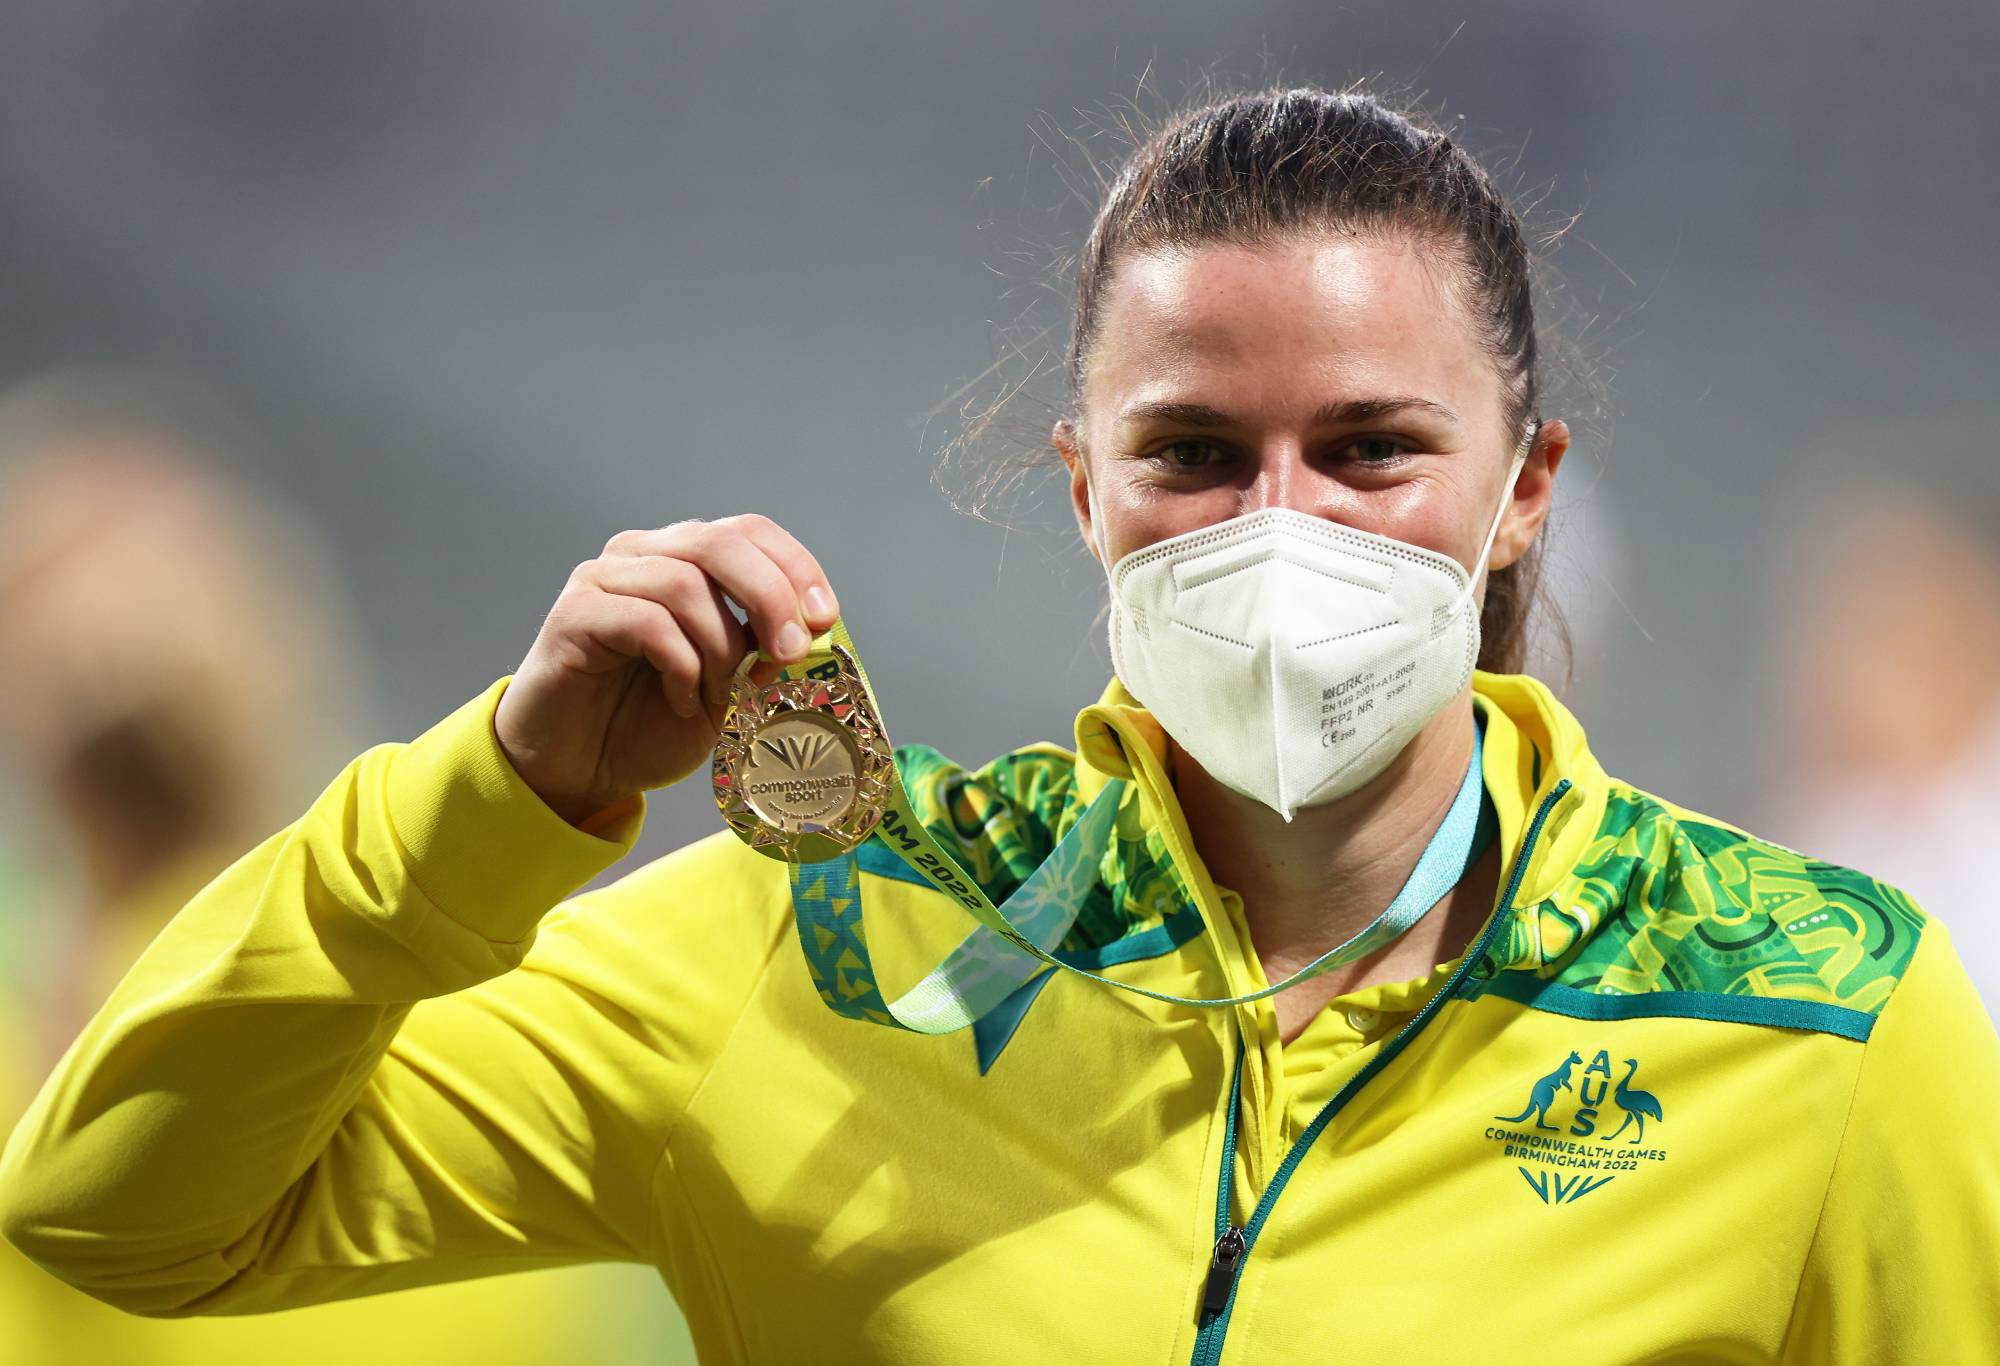 Tahlia McGrath of Team Australia poses after being presented with a Gold Medal during the Cricket T20 - Gold Medal match between Team Australia and Team India on day ten of the Birmingham 2022 Commonwealth Games at Edgbaston on August 07, 2022 on the Birmingham, England. (Photo by Ryan Pierse/Getty Images)